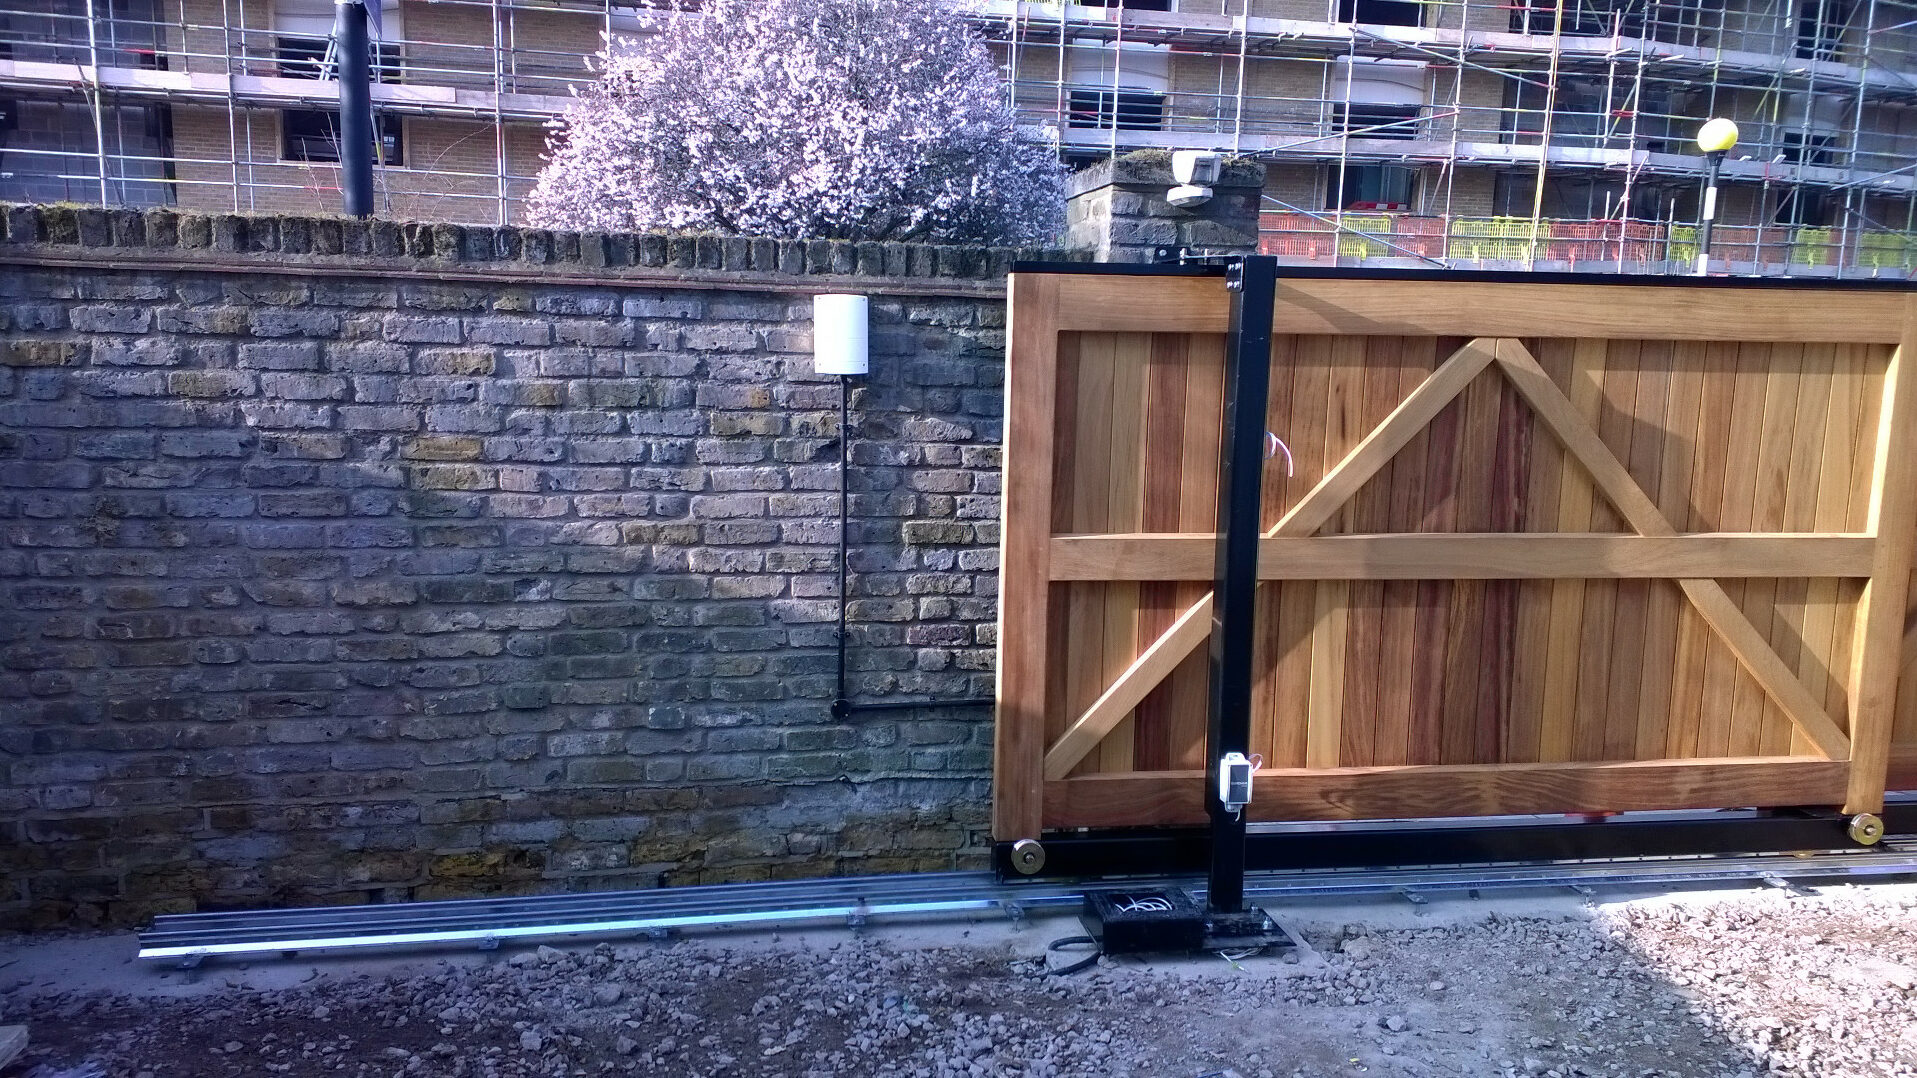 Automatic sliding wooden gate